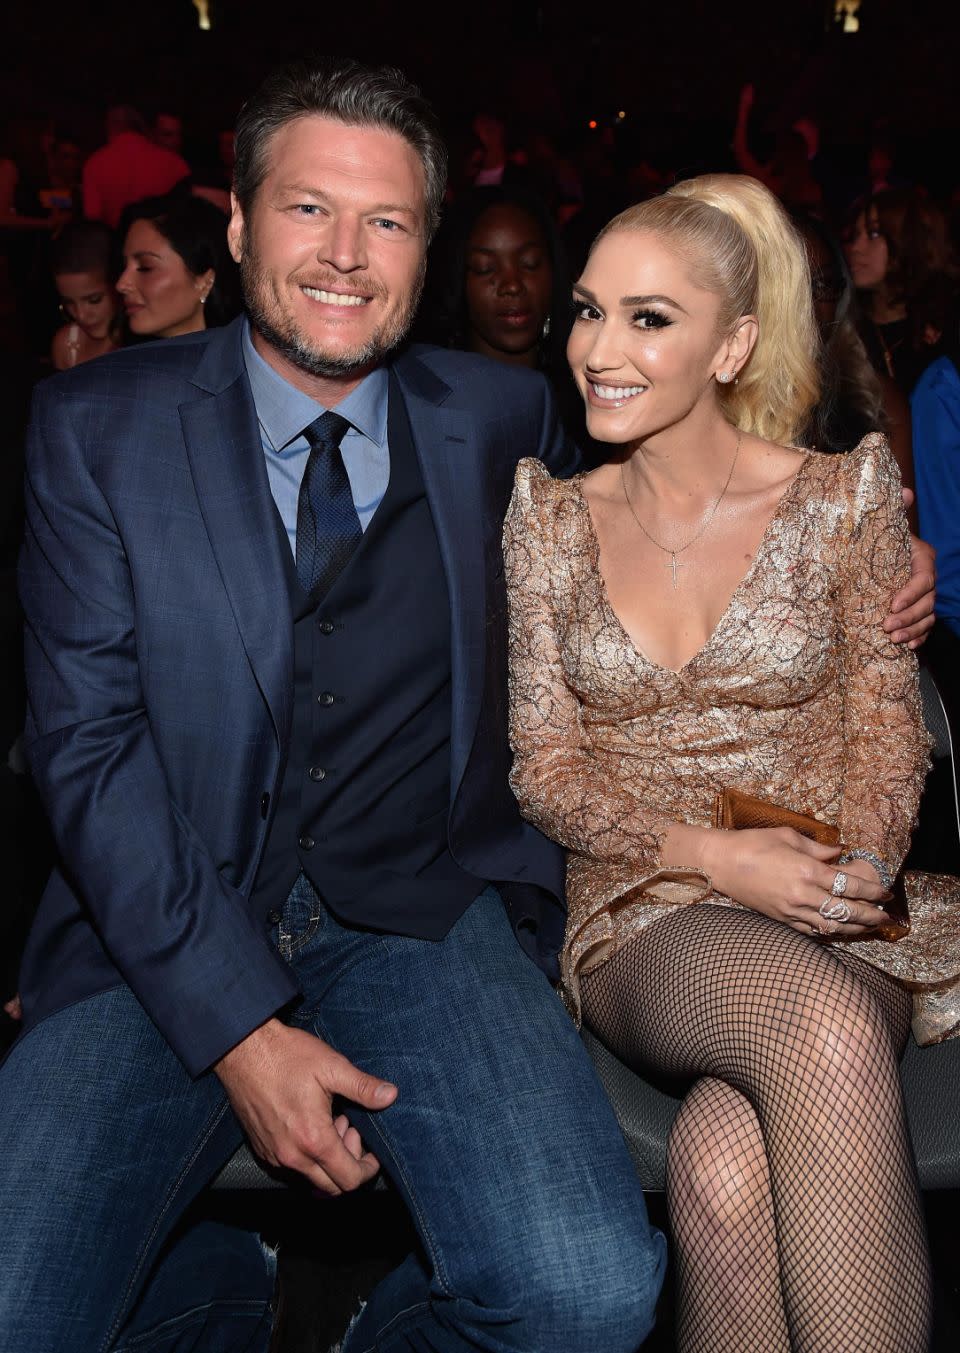 The rumour mill has also been going around Blake Shelton and Gwen Stefani. Photo: Getty